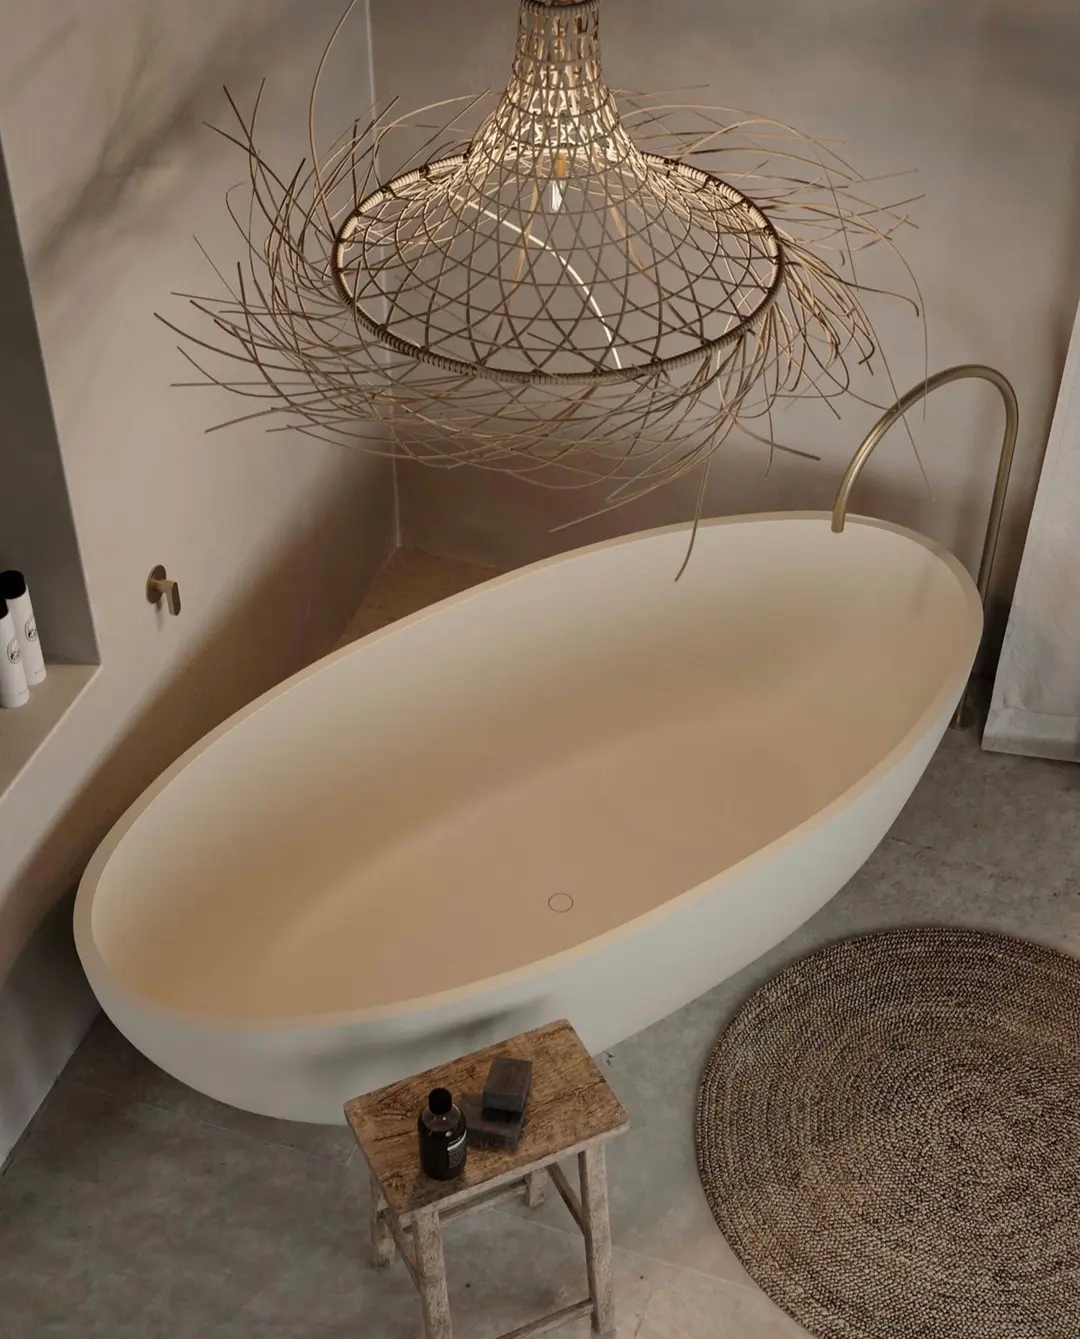 A Coastal Boho Bathroom features a freestanding oval bathtub, a wicker chandelier, a small wooden stool with toiletries, and a round woven rug on the floor—creating a serene retreat.